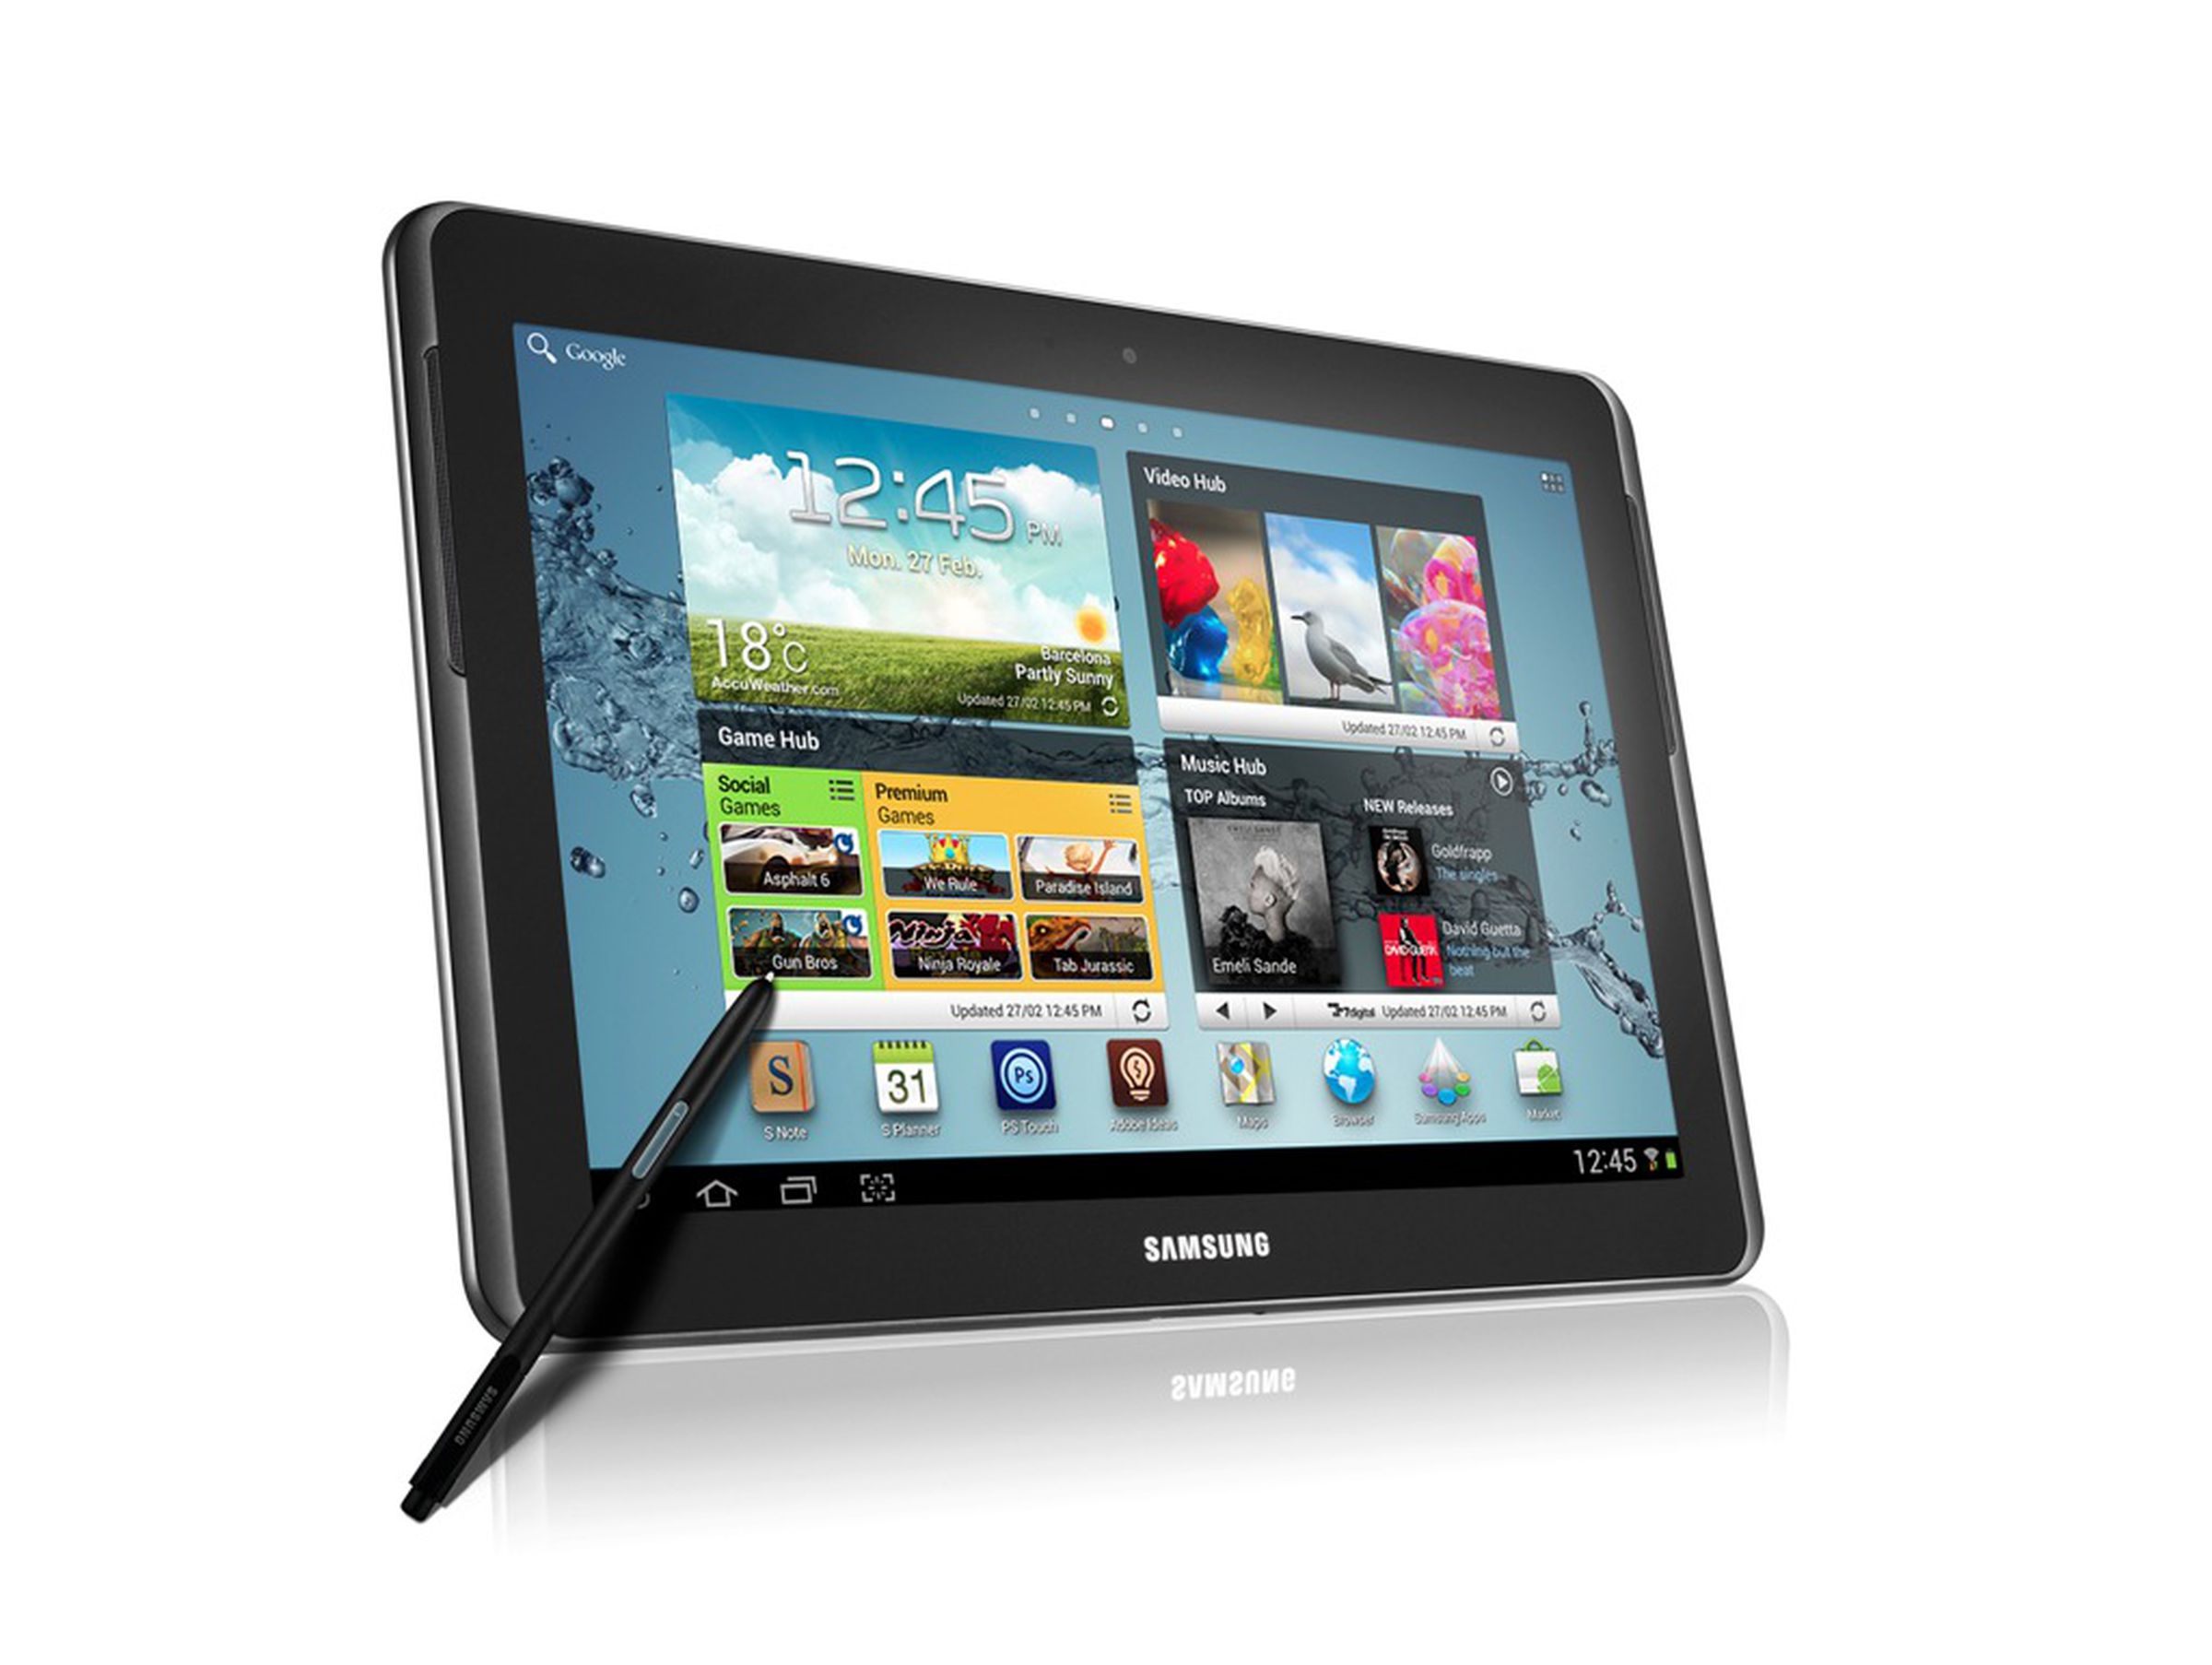 Samsung Galaxy Note 10.1 press images